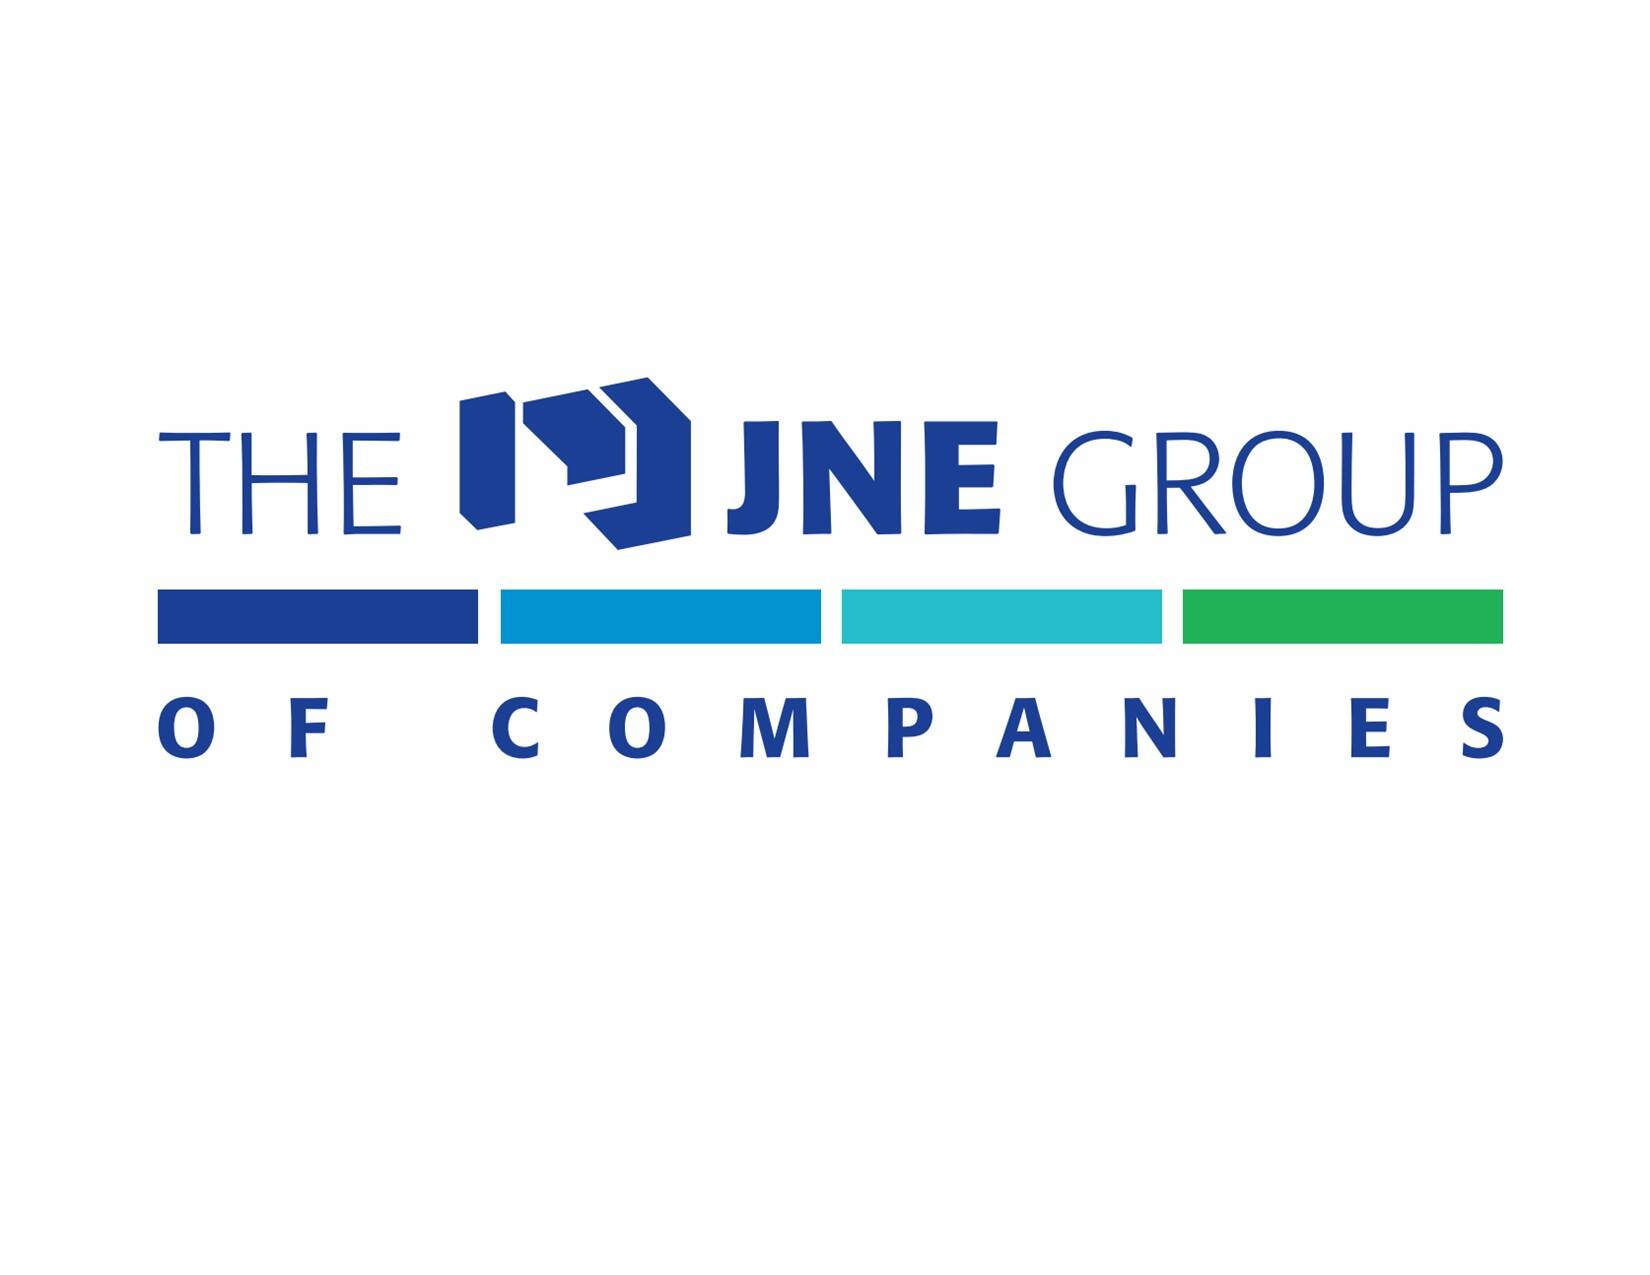 The JNE Group of Companies